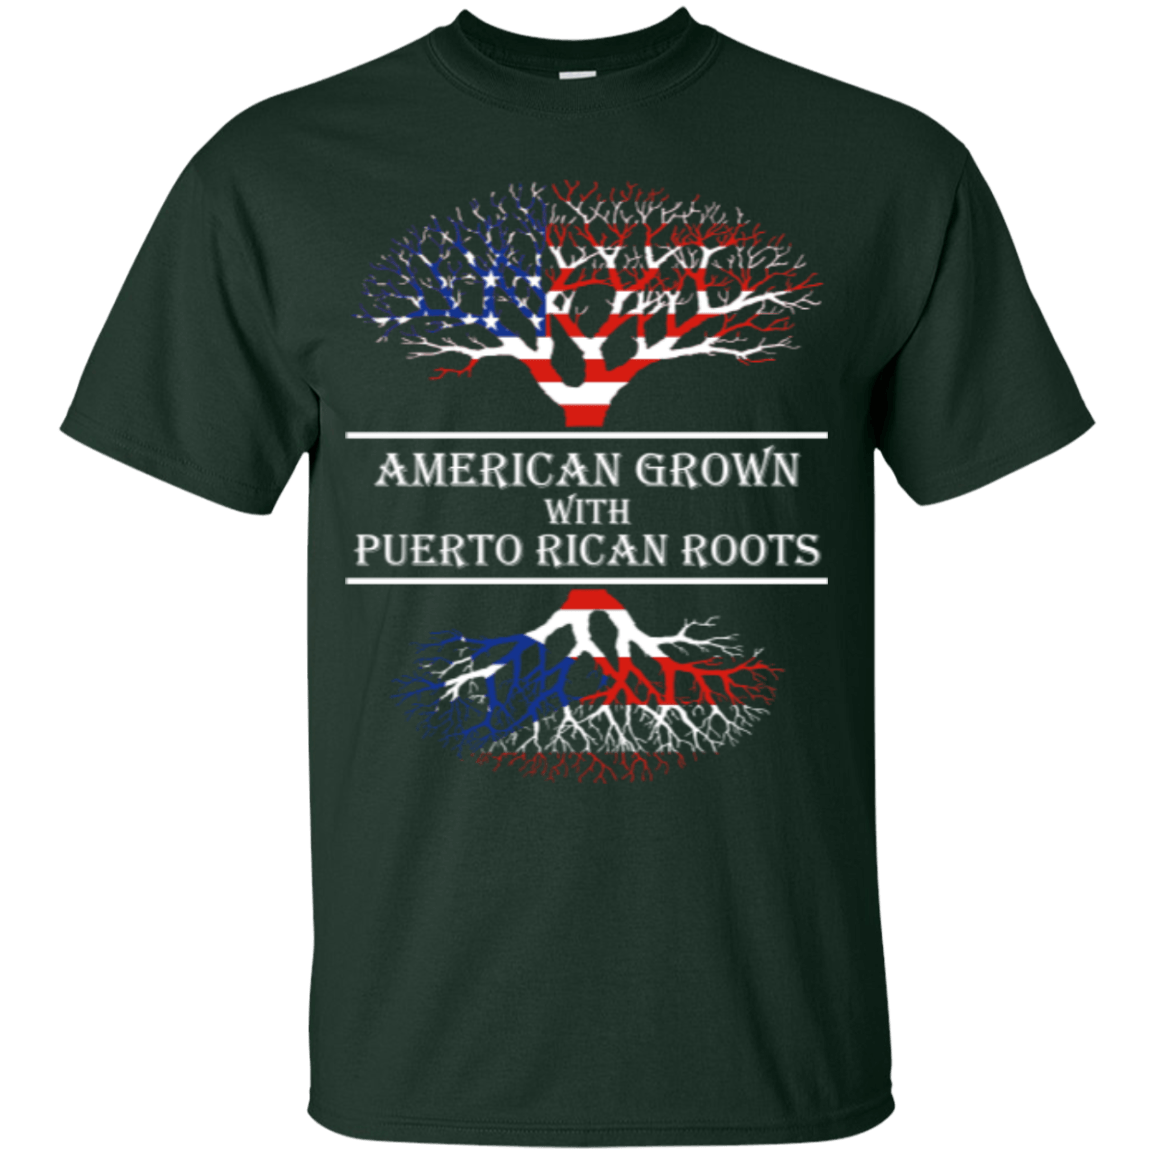 Youth Tee - American With Puerto Rican Roots - Youth